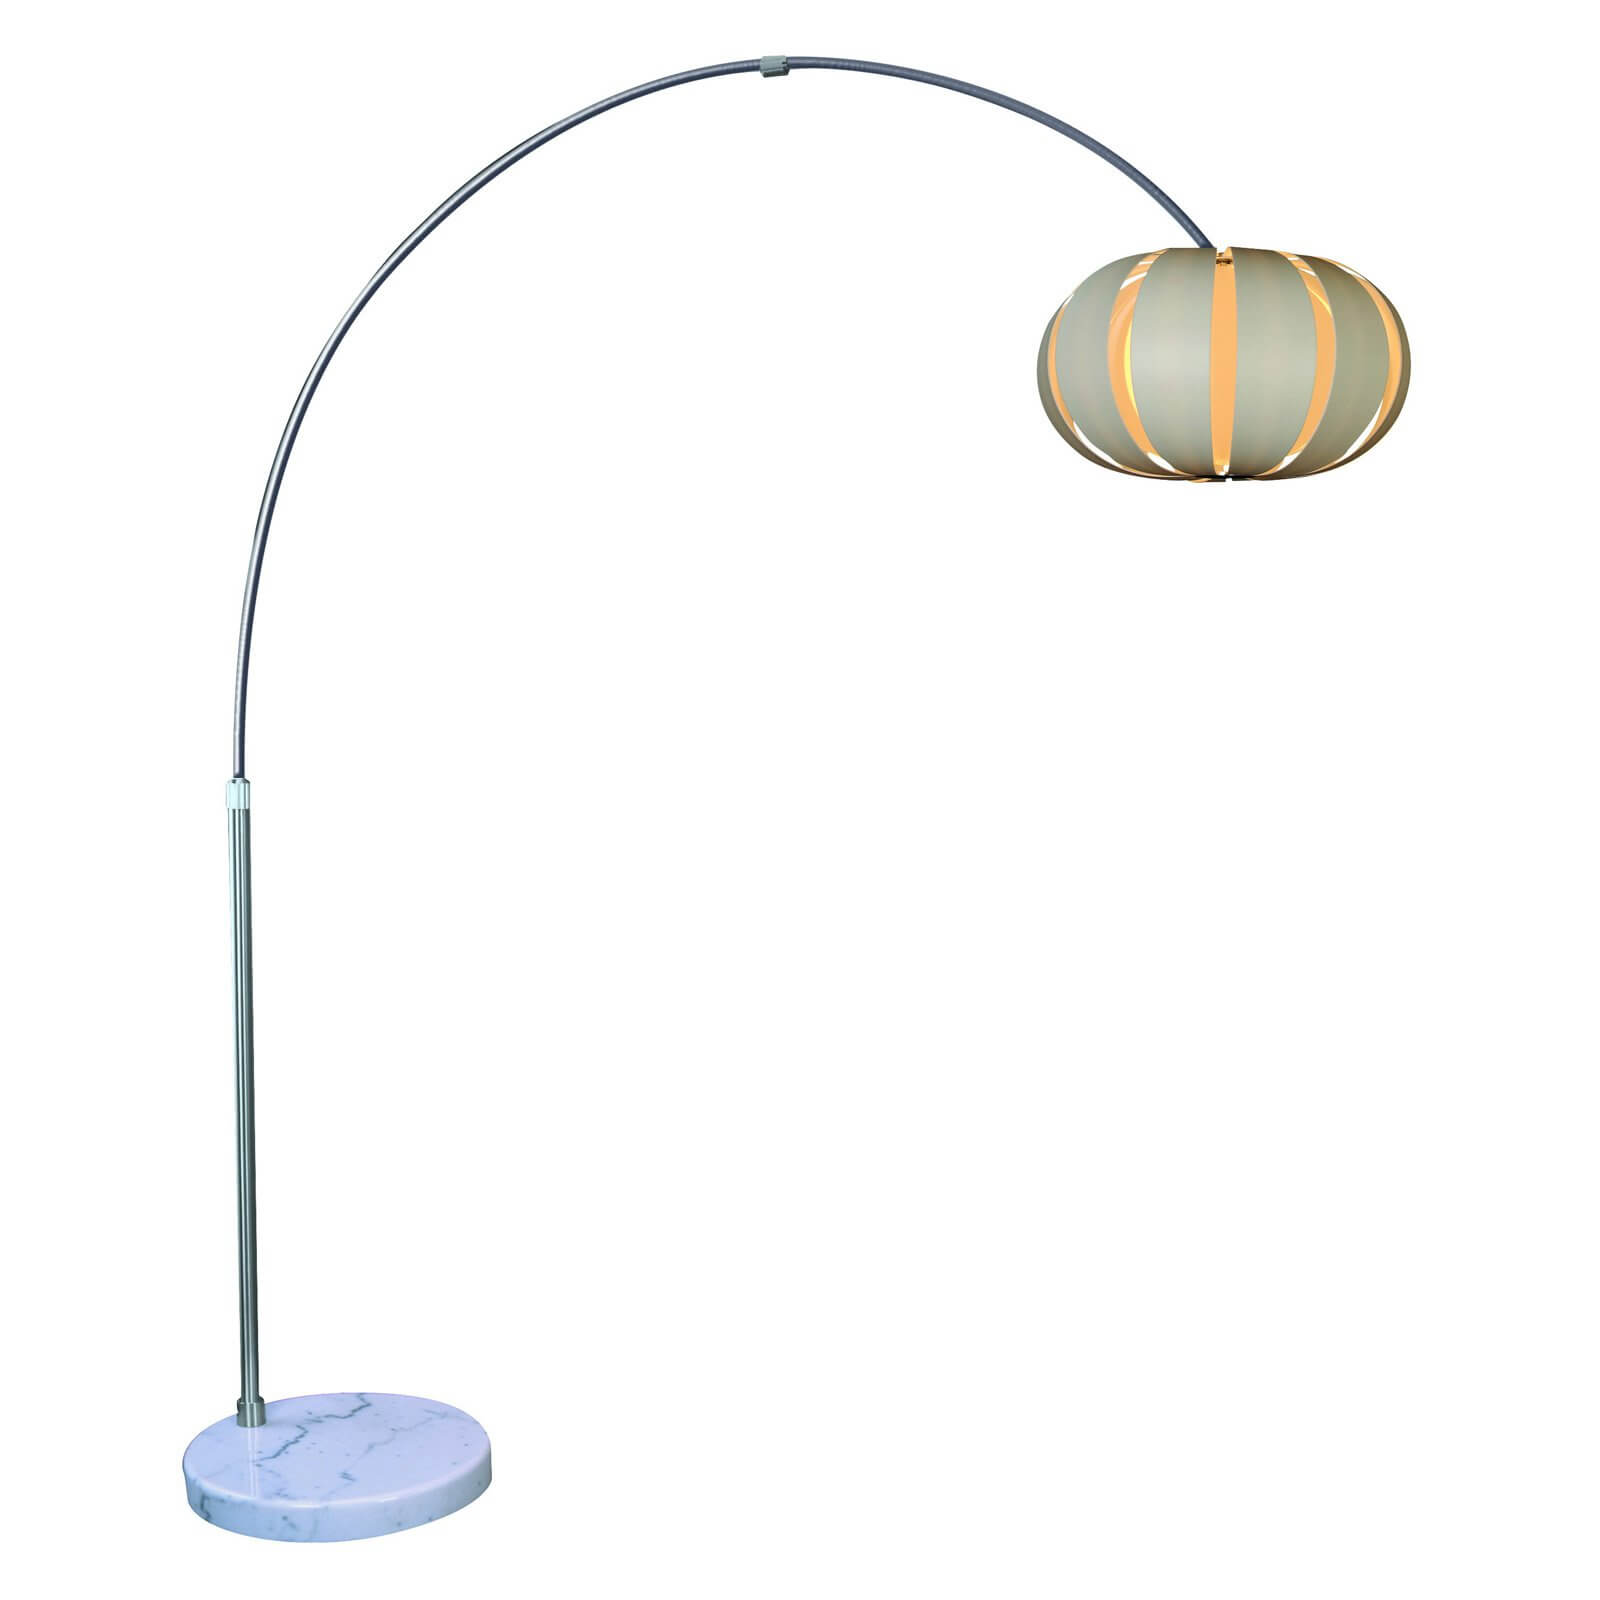 The first example here features metallic construction, with a curved spine over marble base, holding a spherical white petal shade.